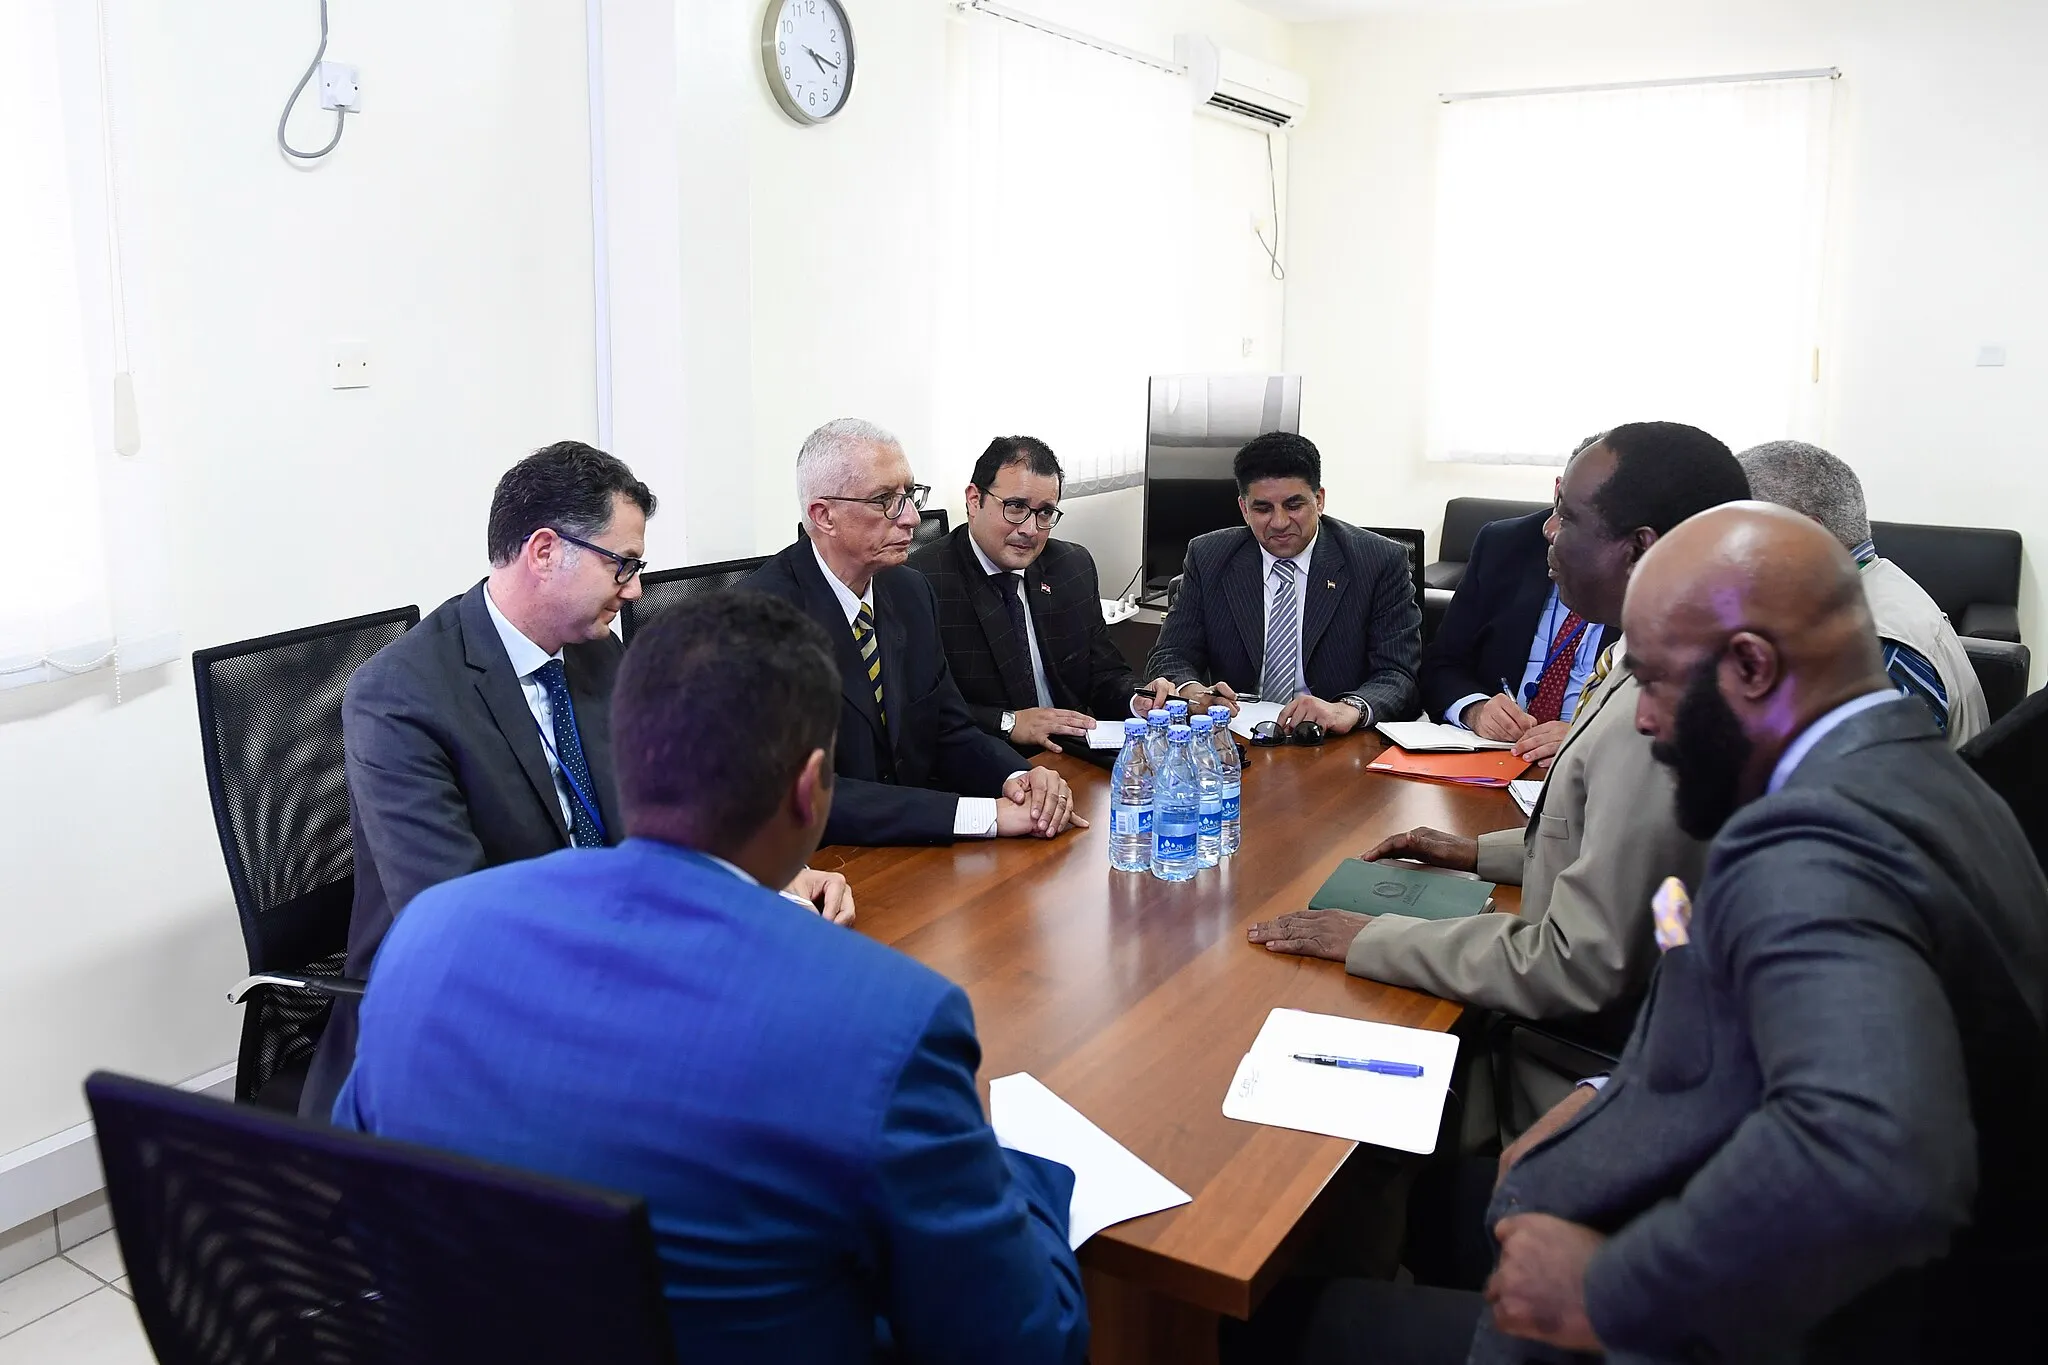 Photo showing: Ambassador Francisco Madeira, the Special Representative of the Chairperson of the African Union Commission (SRCC) for Somalia, meets with a delegation led by H.E. Ambassador Hamdi Sanad Loza, Egyptian Deputy Minister of Foreign Affairs, at the AMISOM Mission Headquarters in Mogadishu, Somalia on 4 May 2019. AMISOM Photo / Omar Abdisalan